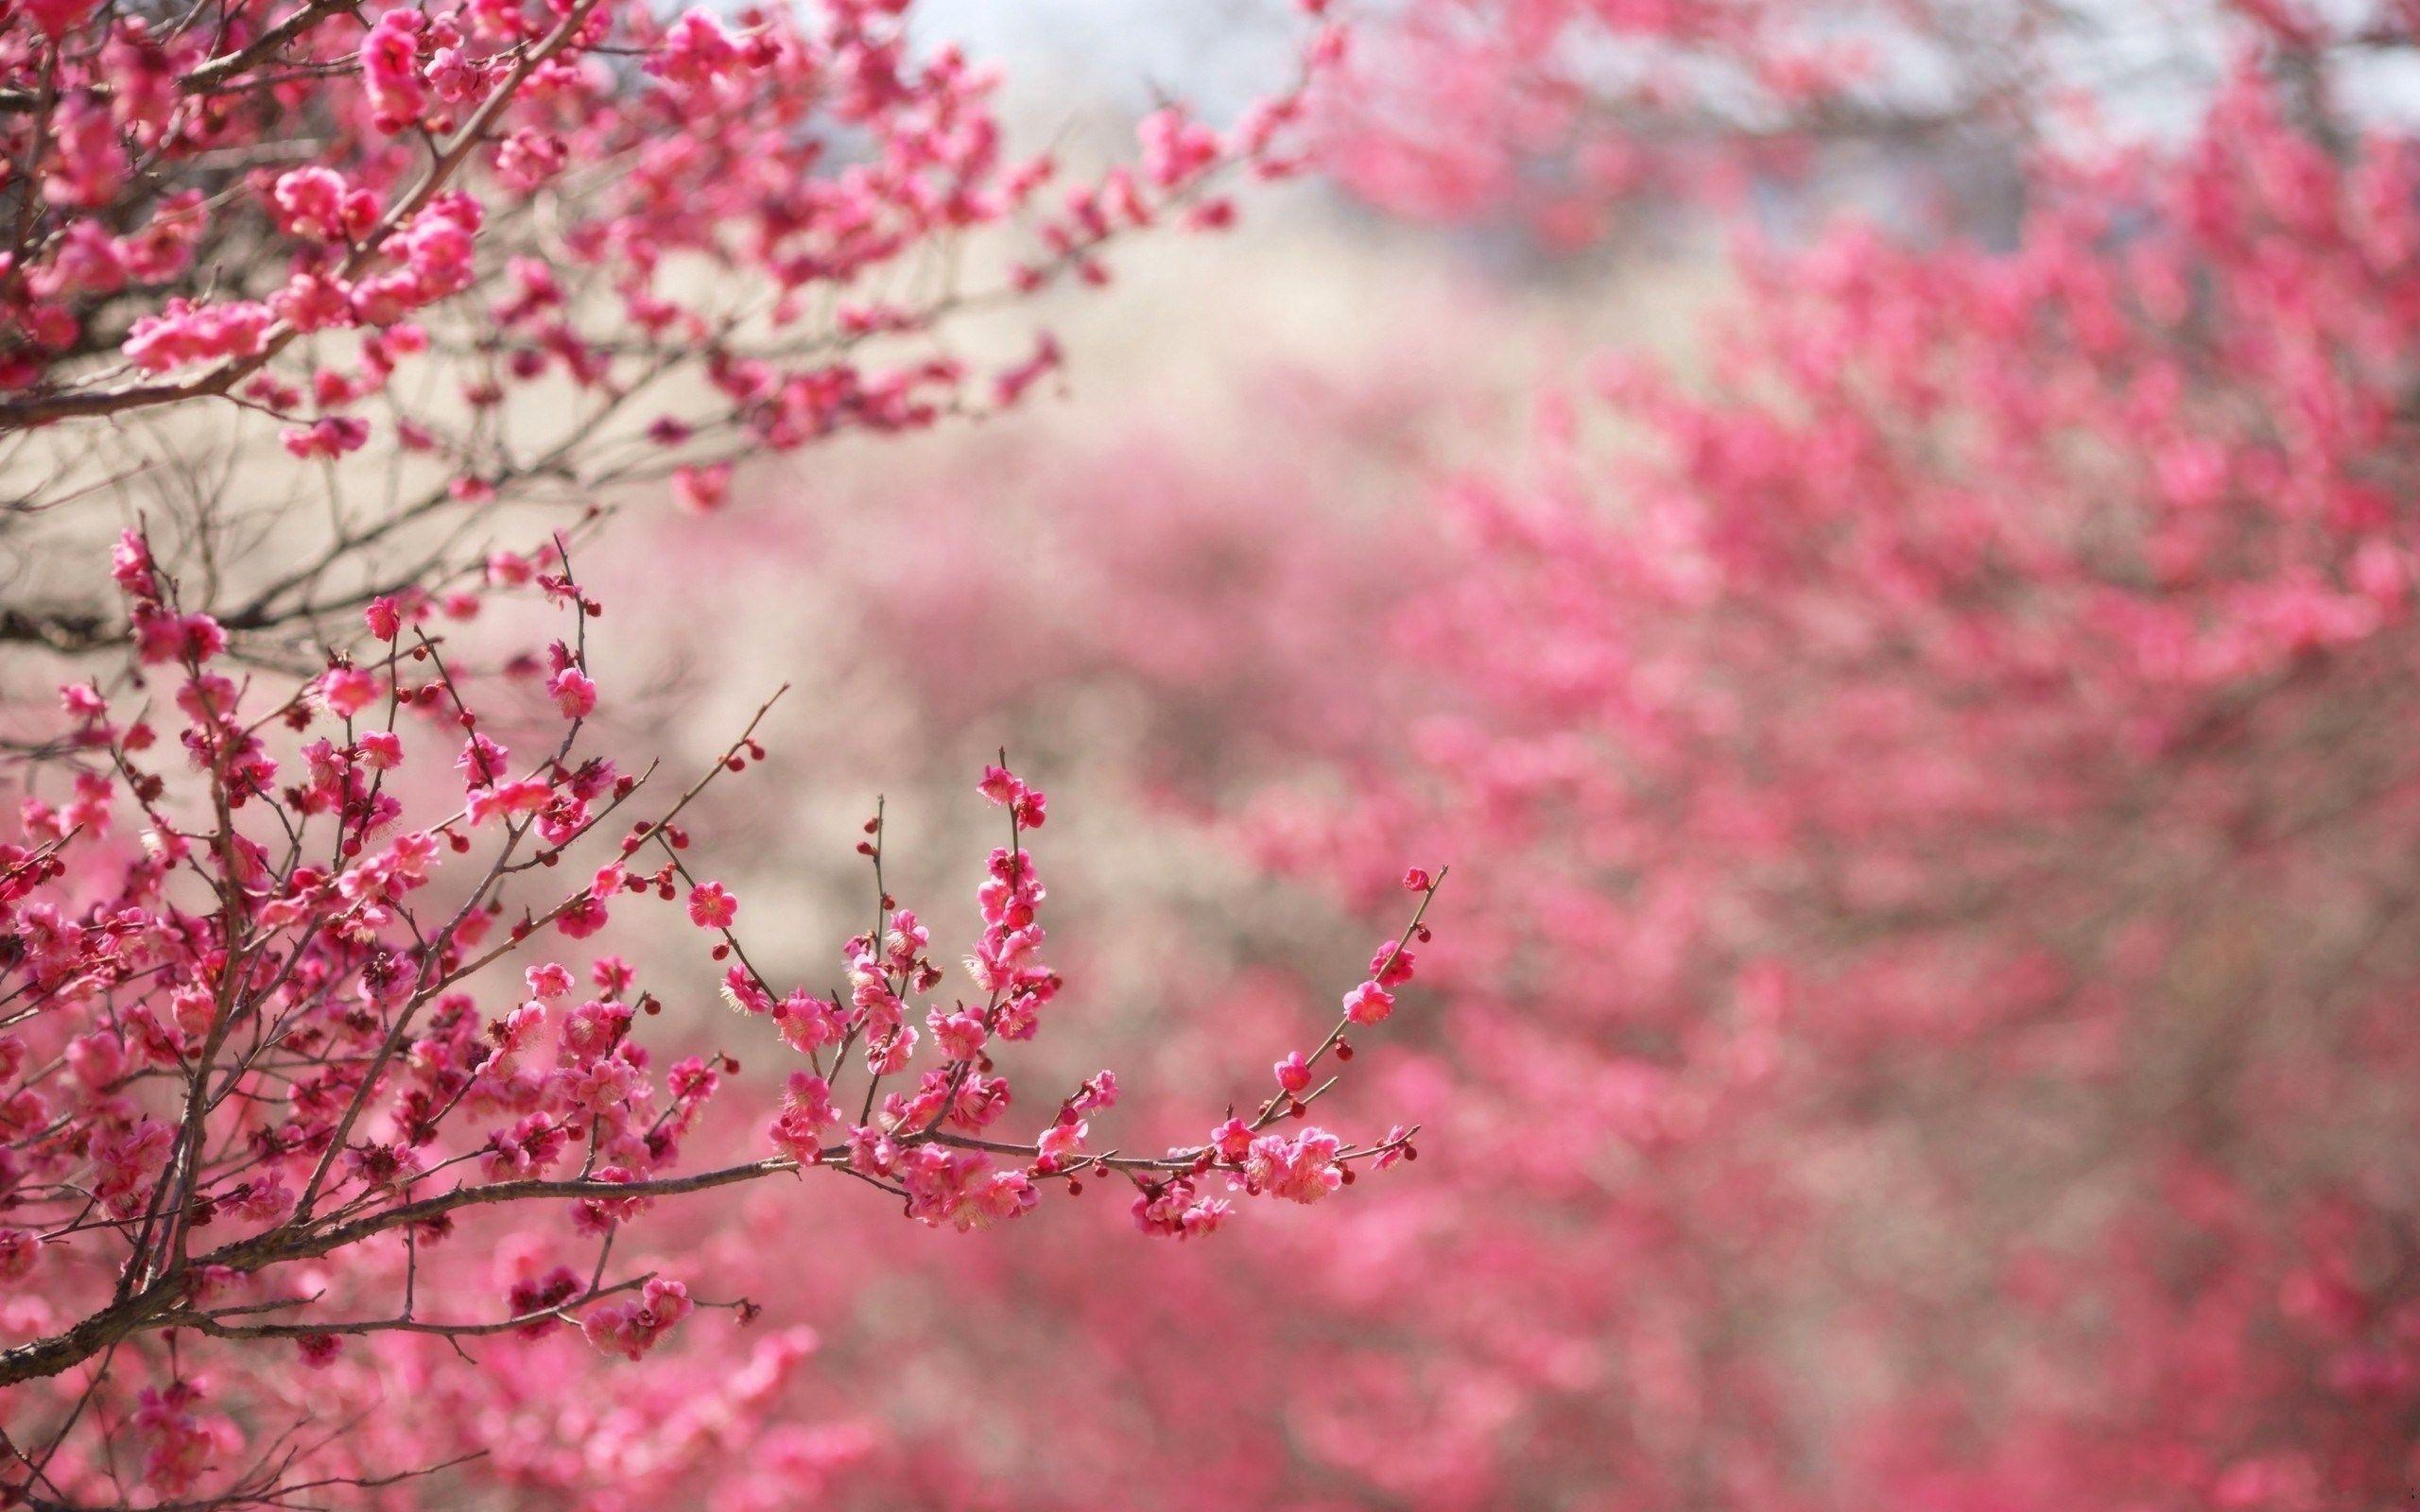 Spring Nature Cherry Blossoms Hq Cool 14 HD Wallpaper. Hdimges